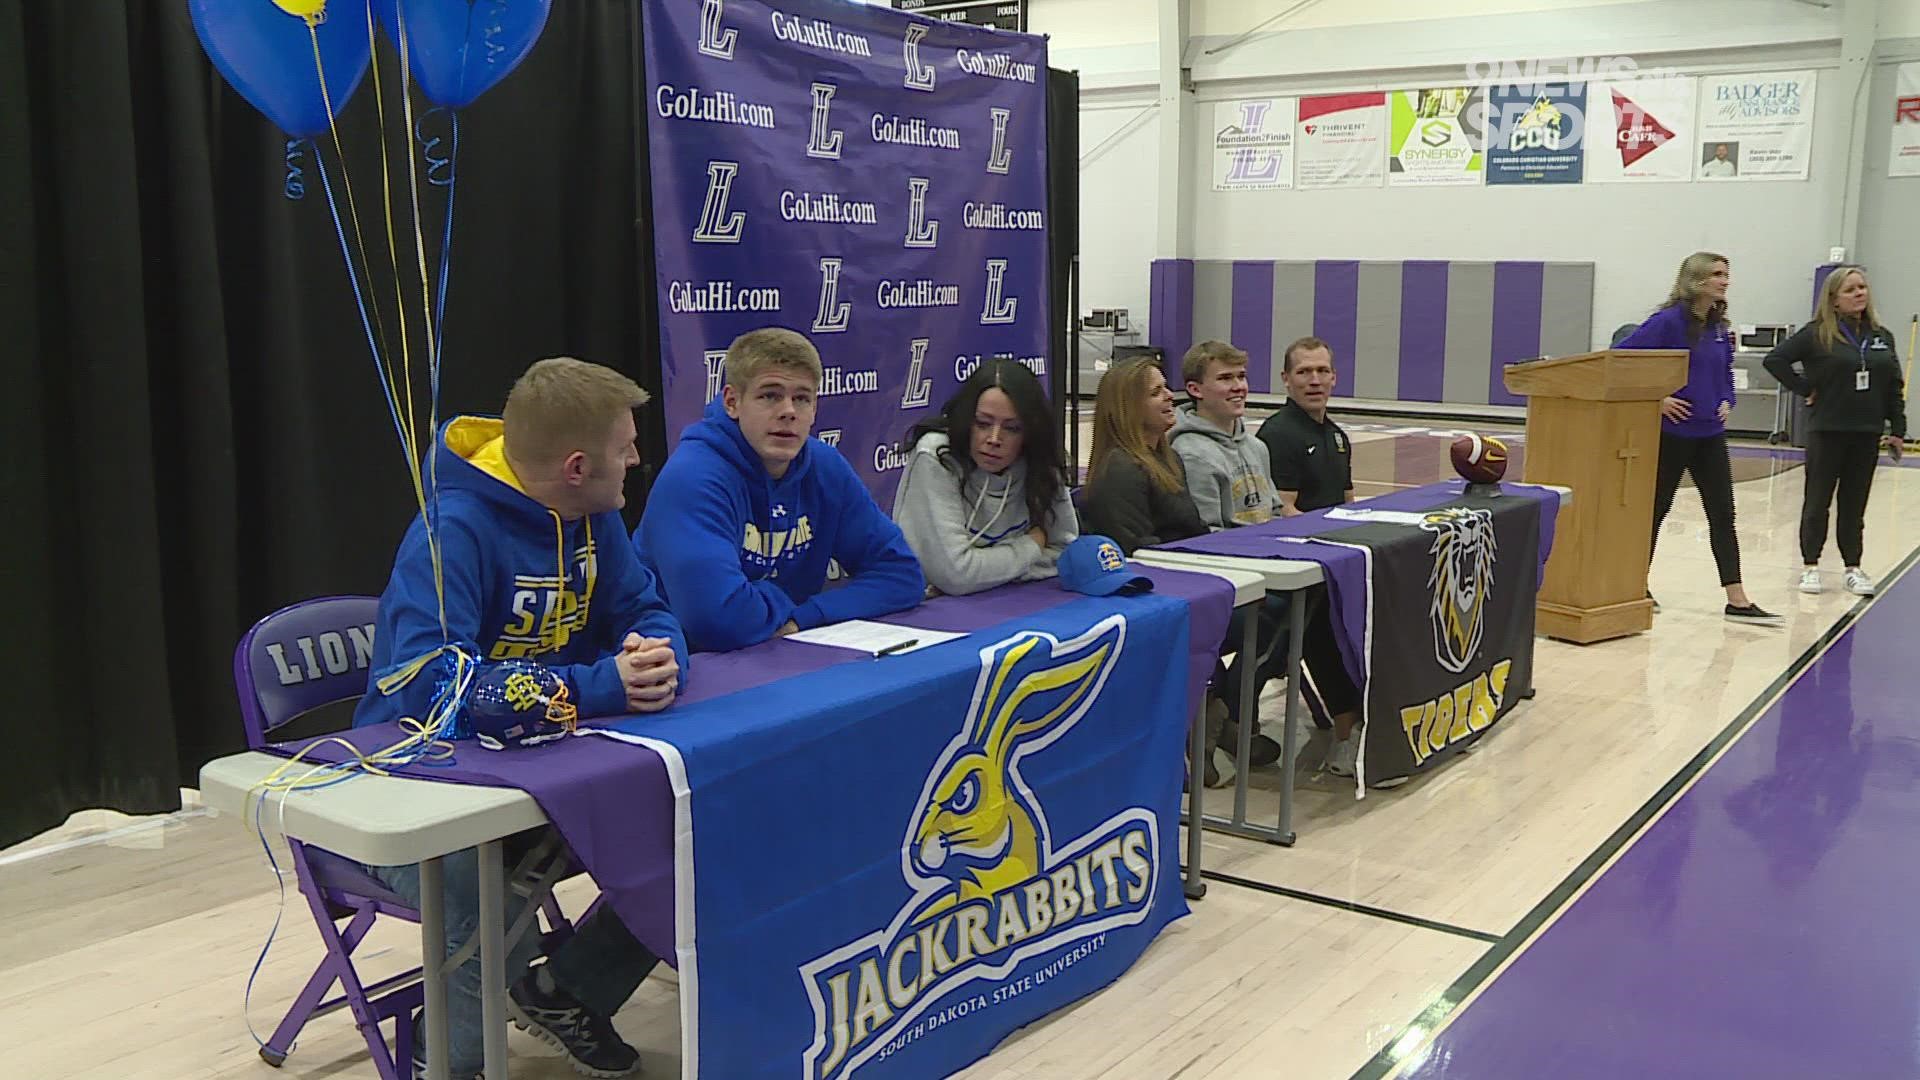 Watch as student-athletes from Lutheran High School sign their National Letters of Intent to play at college and reflect on their careers